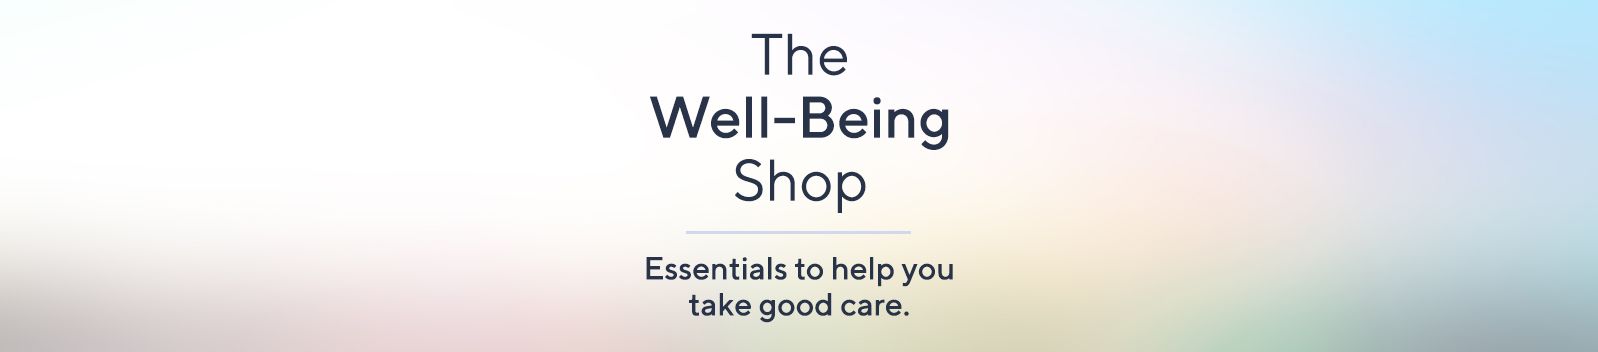 The Well-Being Shop. Essentials to help you take good care.